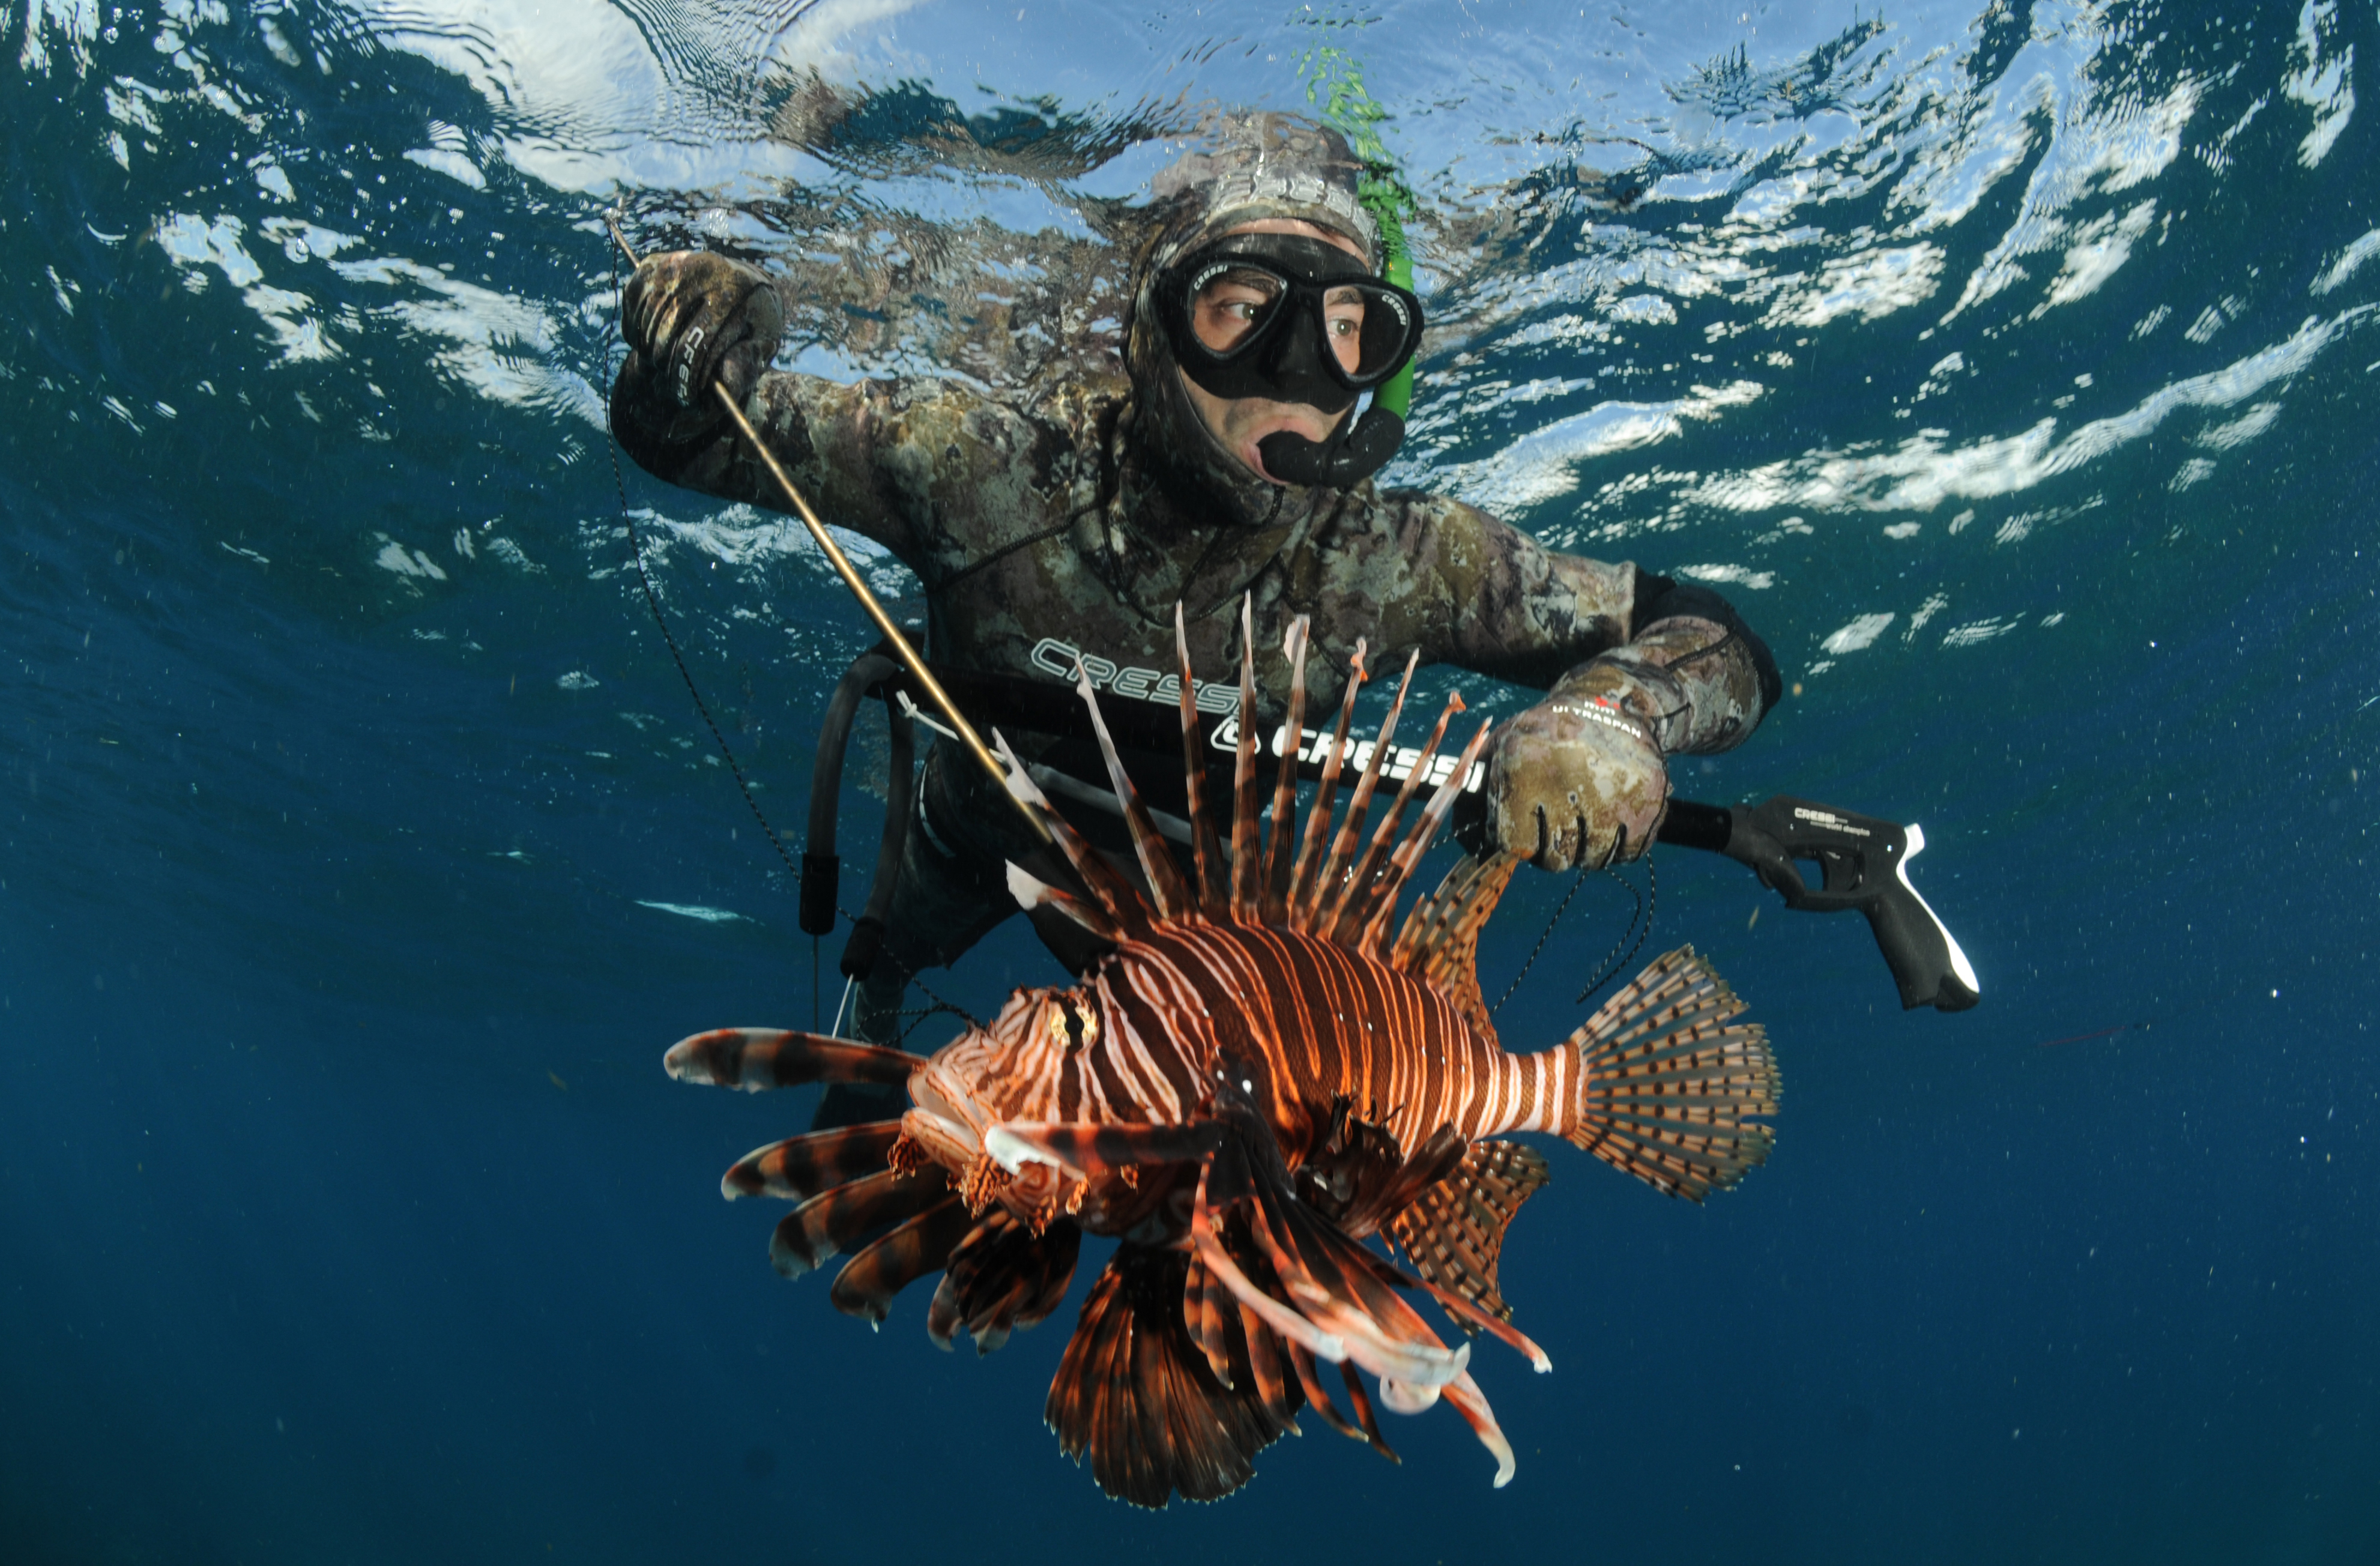 Florida wages war on lionfish that is its harming underwater ecosystem -  CBS News